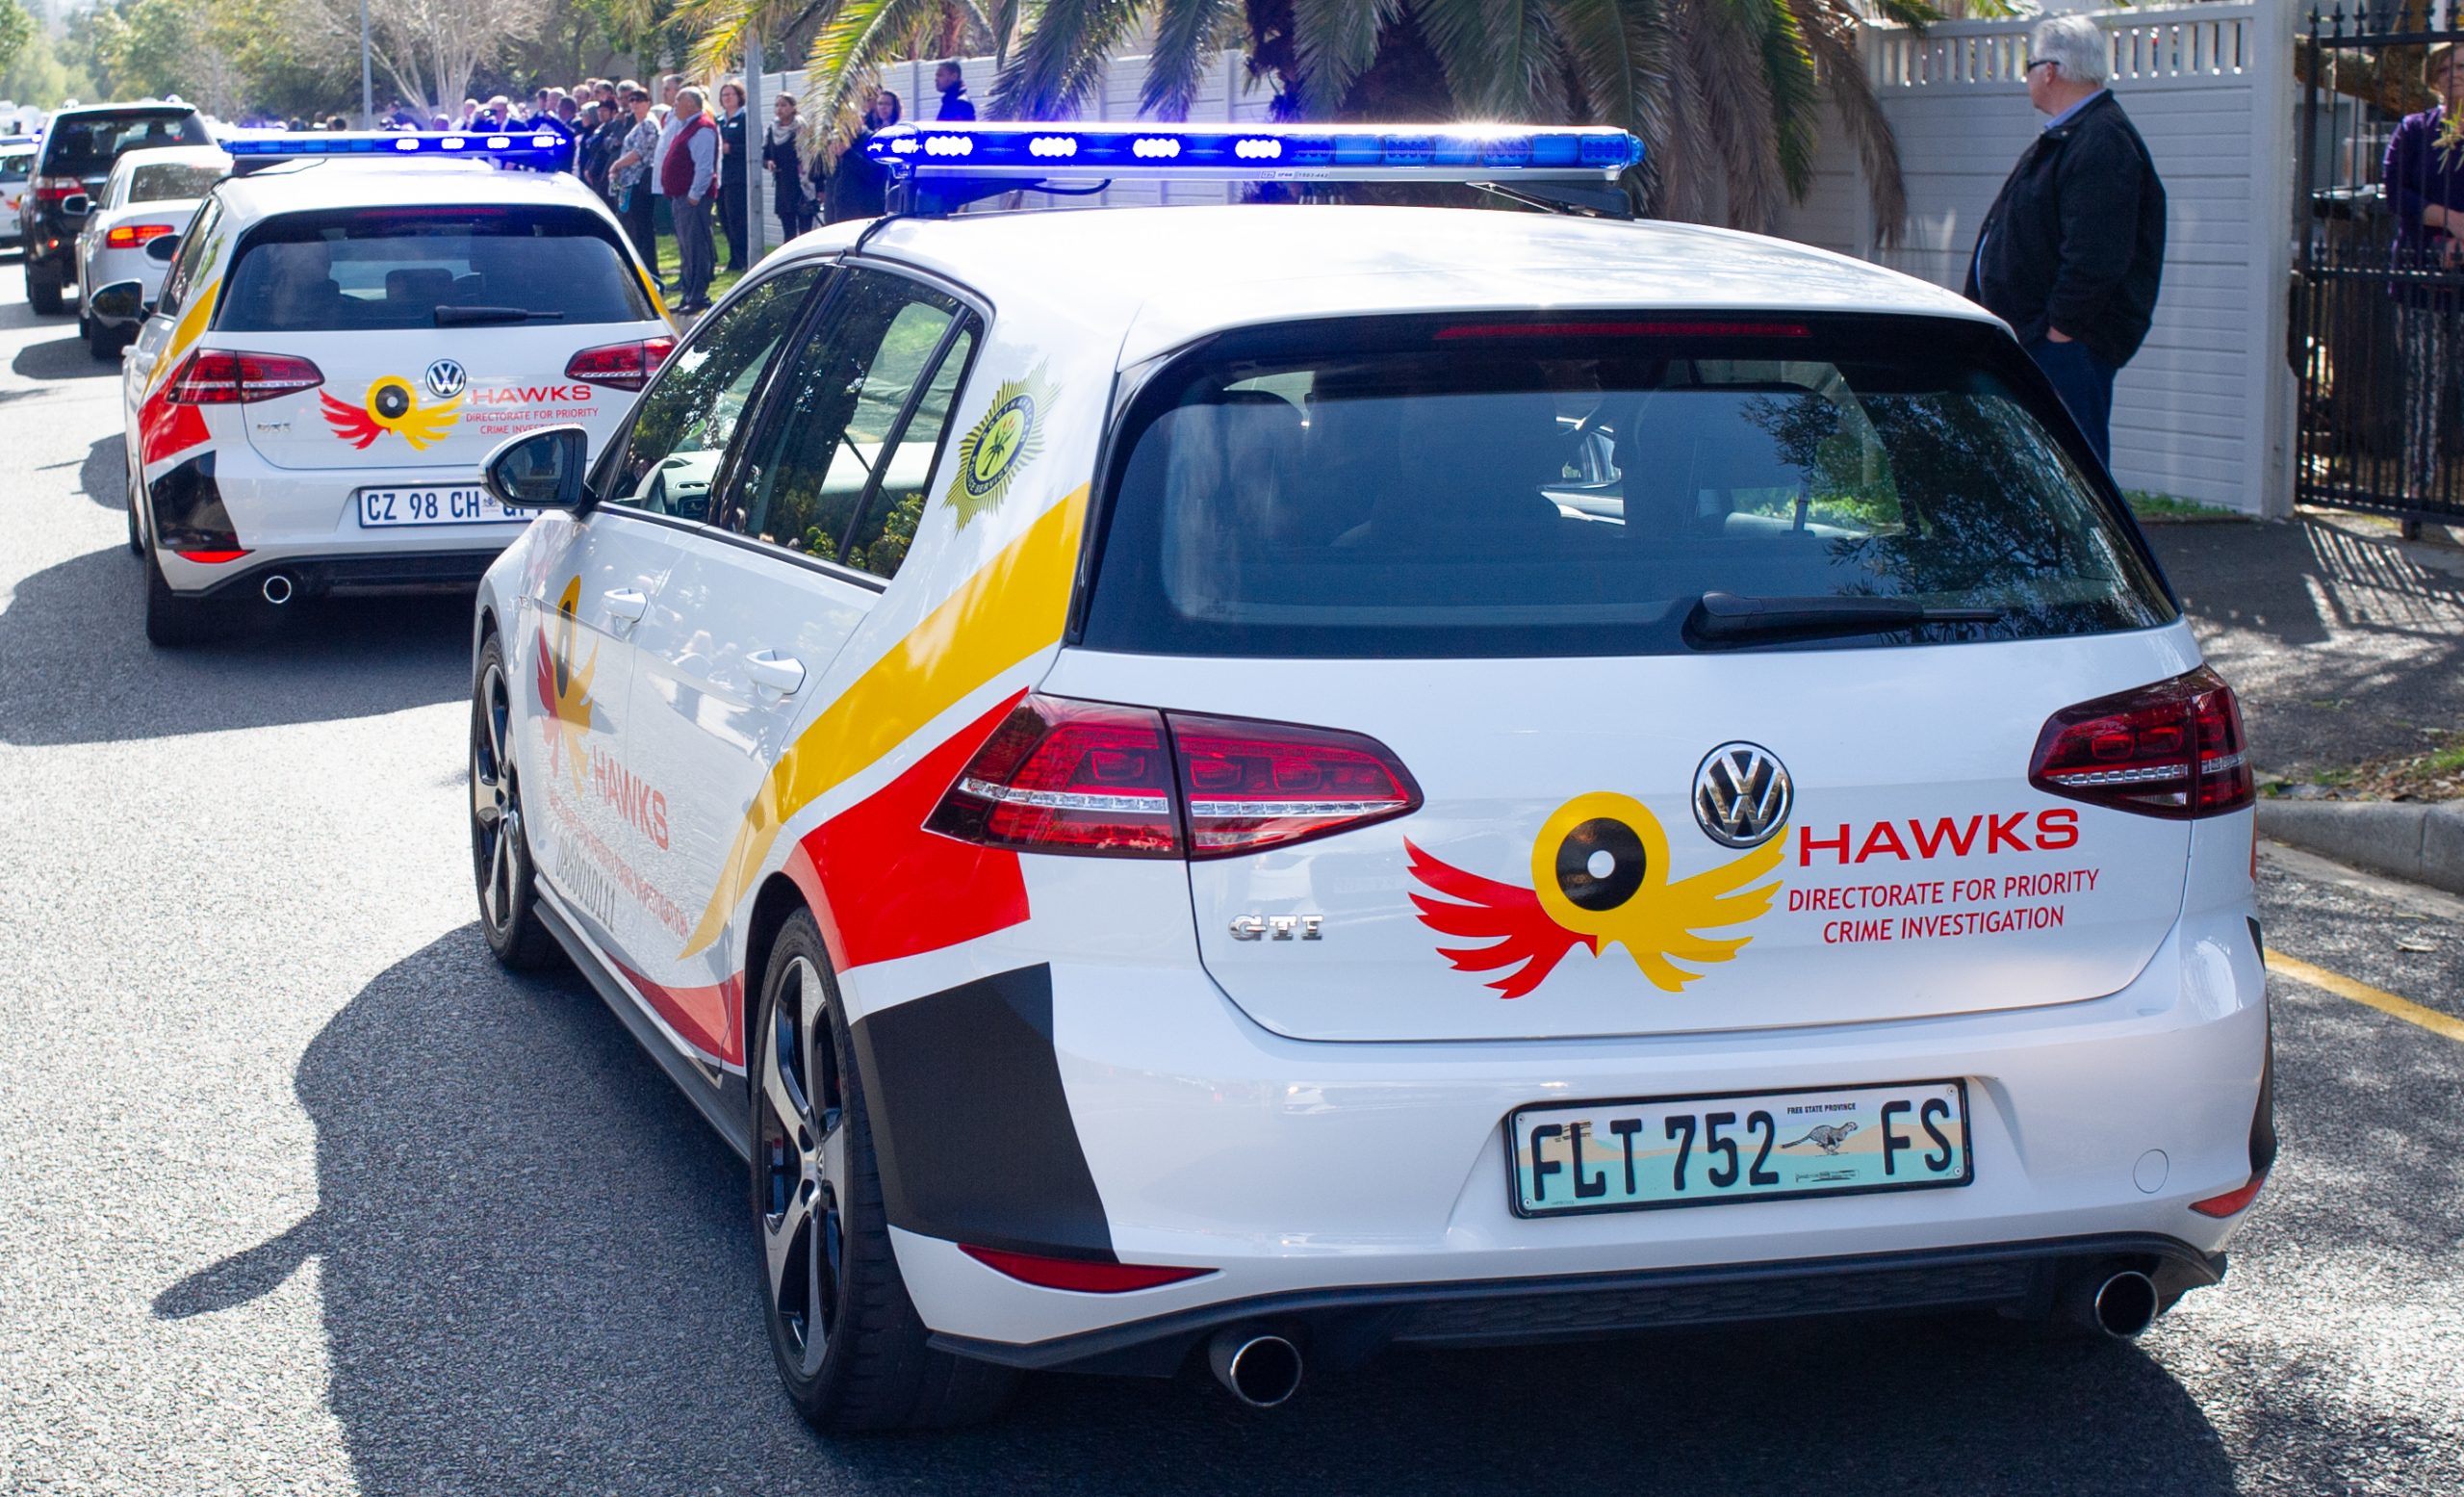 Hawks rearrest Department of Education Centre manager for failing to comply with a court order